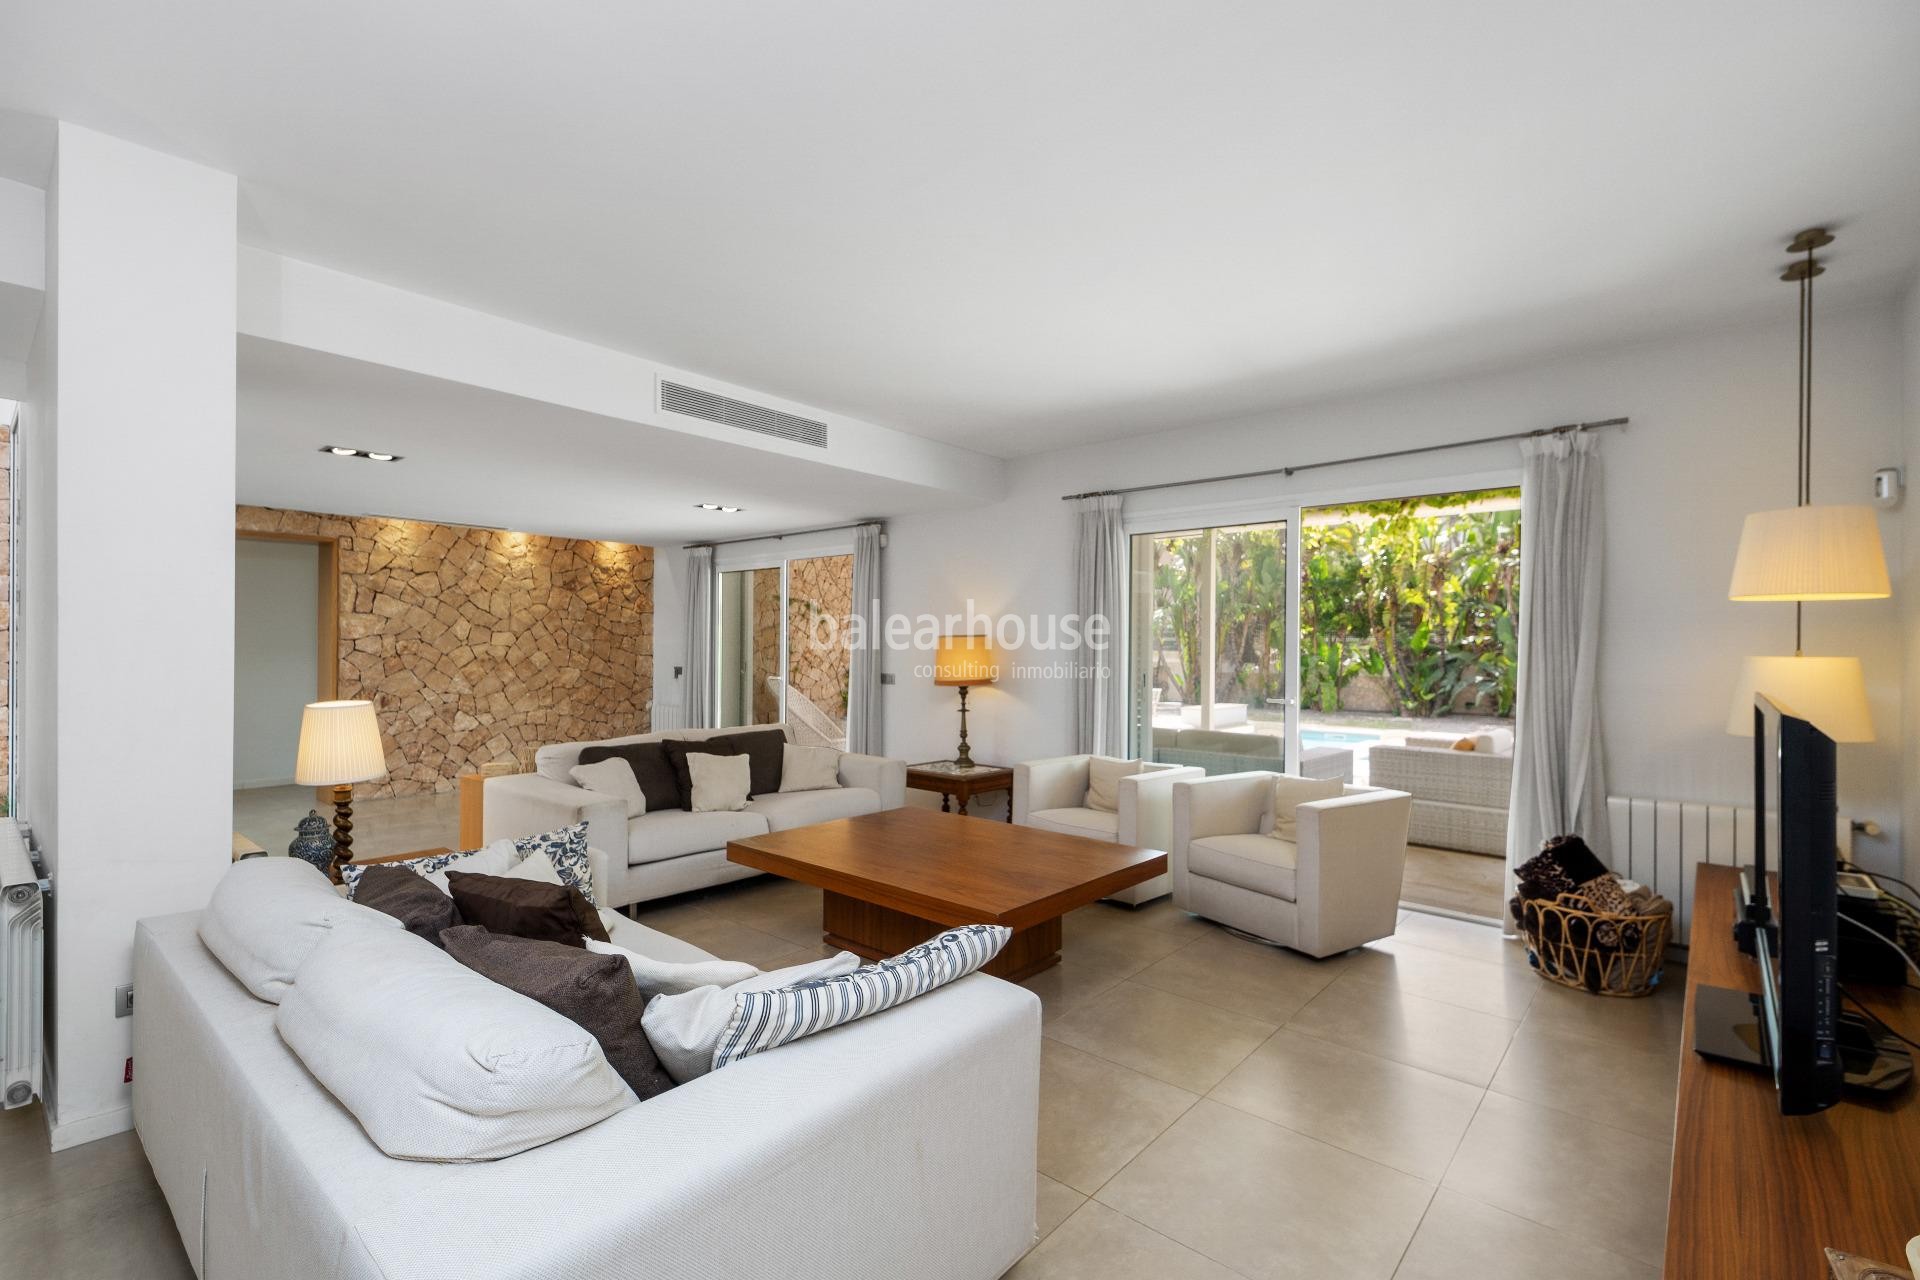 Excellent modern villa with terraces and large swimming pool close to the beach of Palma